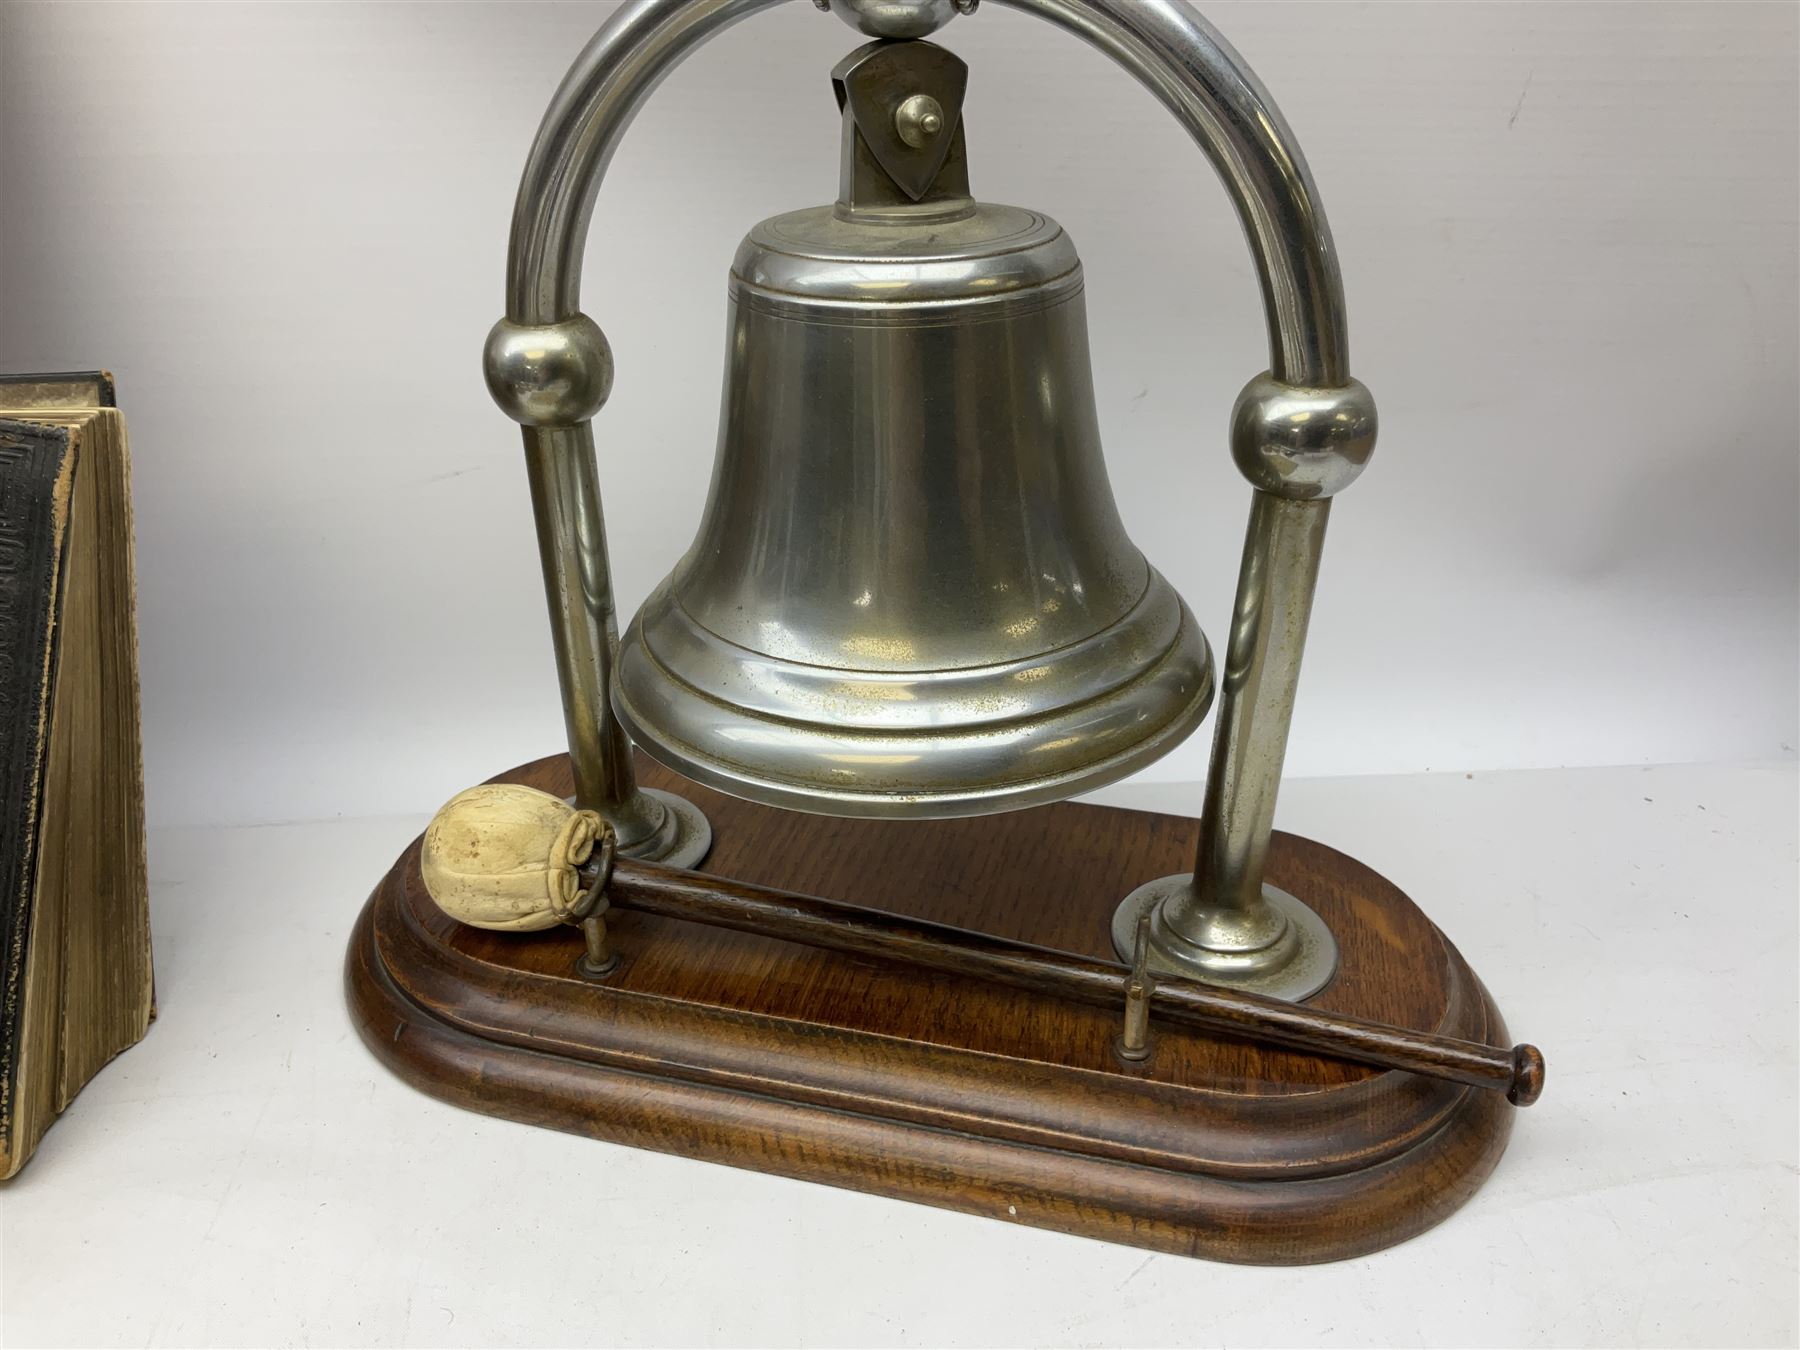 20th century bell gong mounted on an oak stand - Image 2 of 10